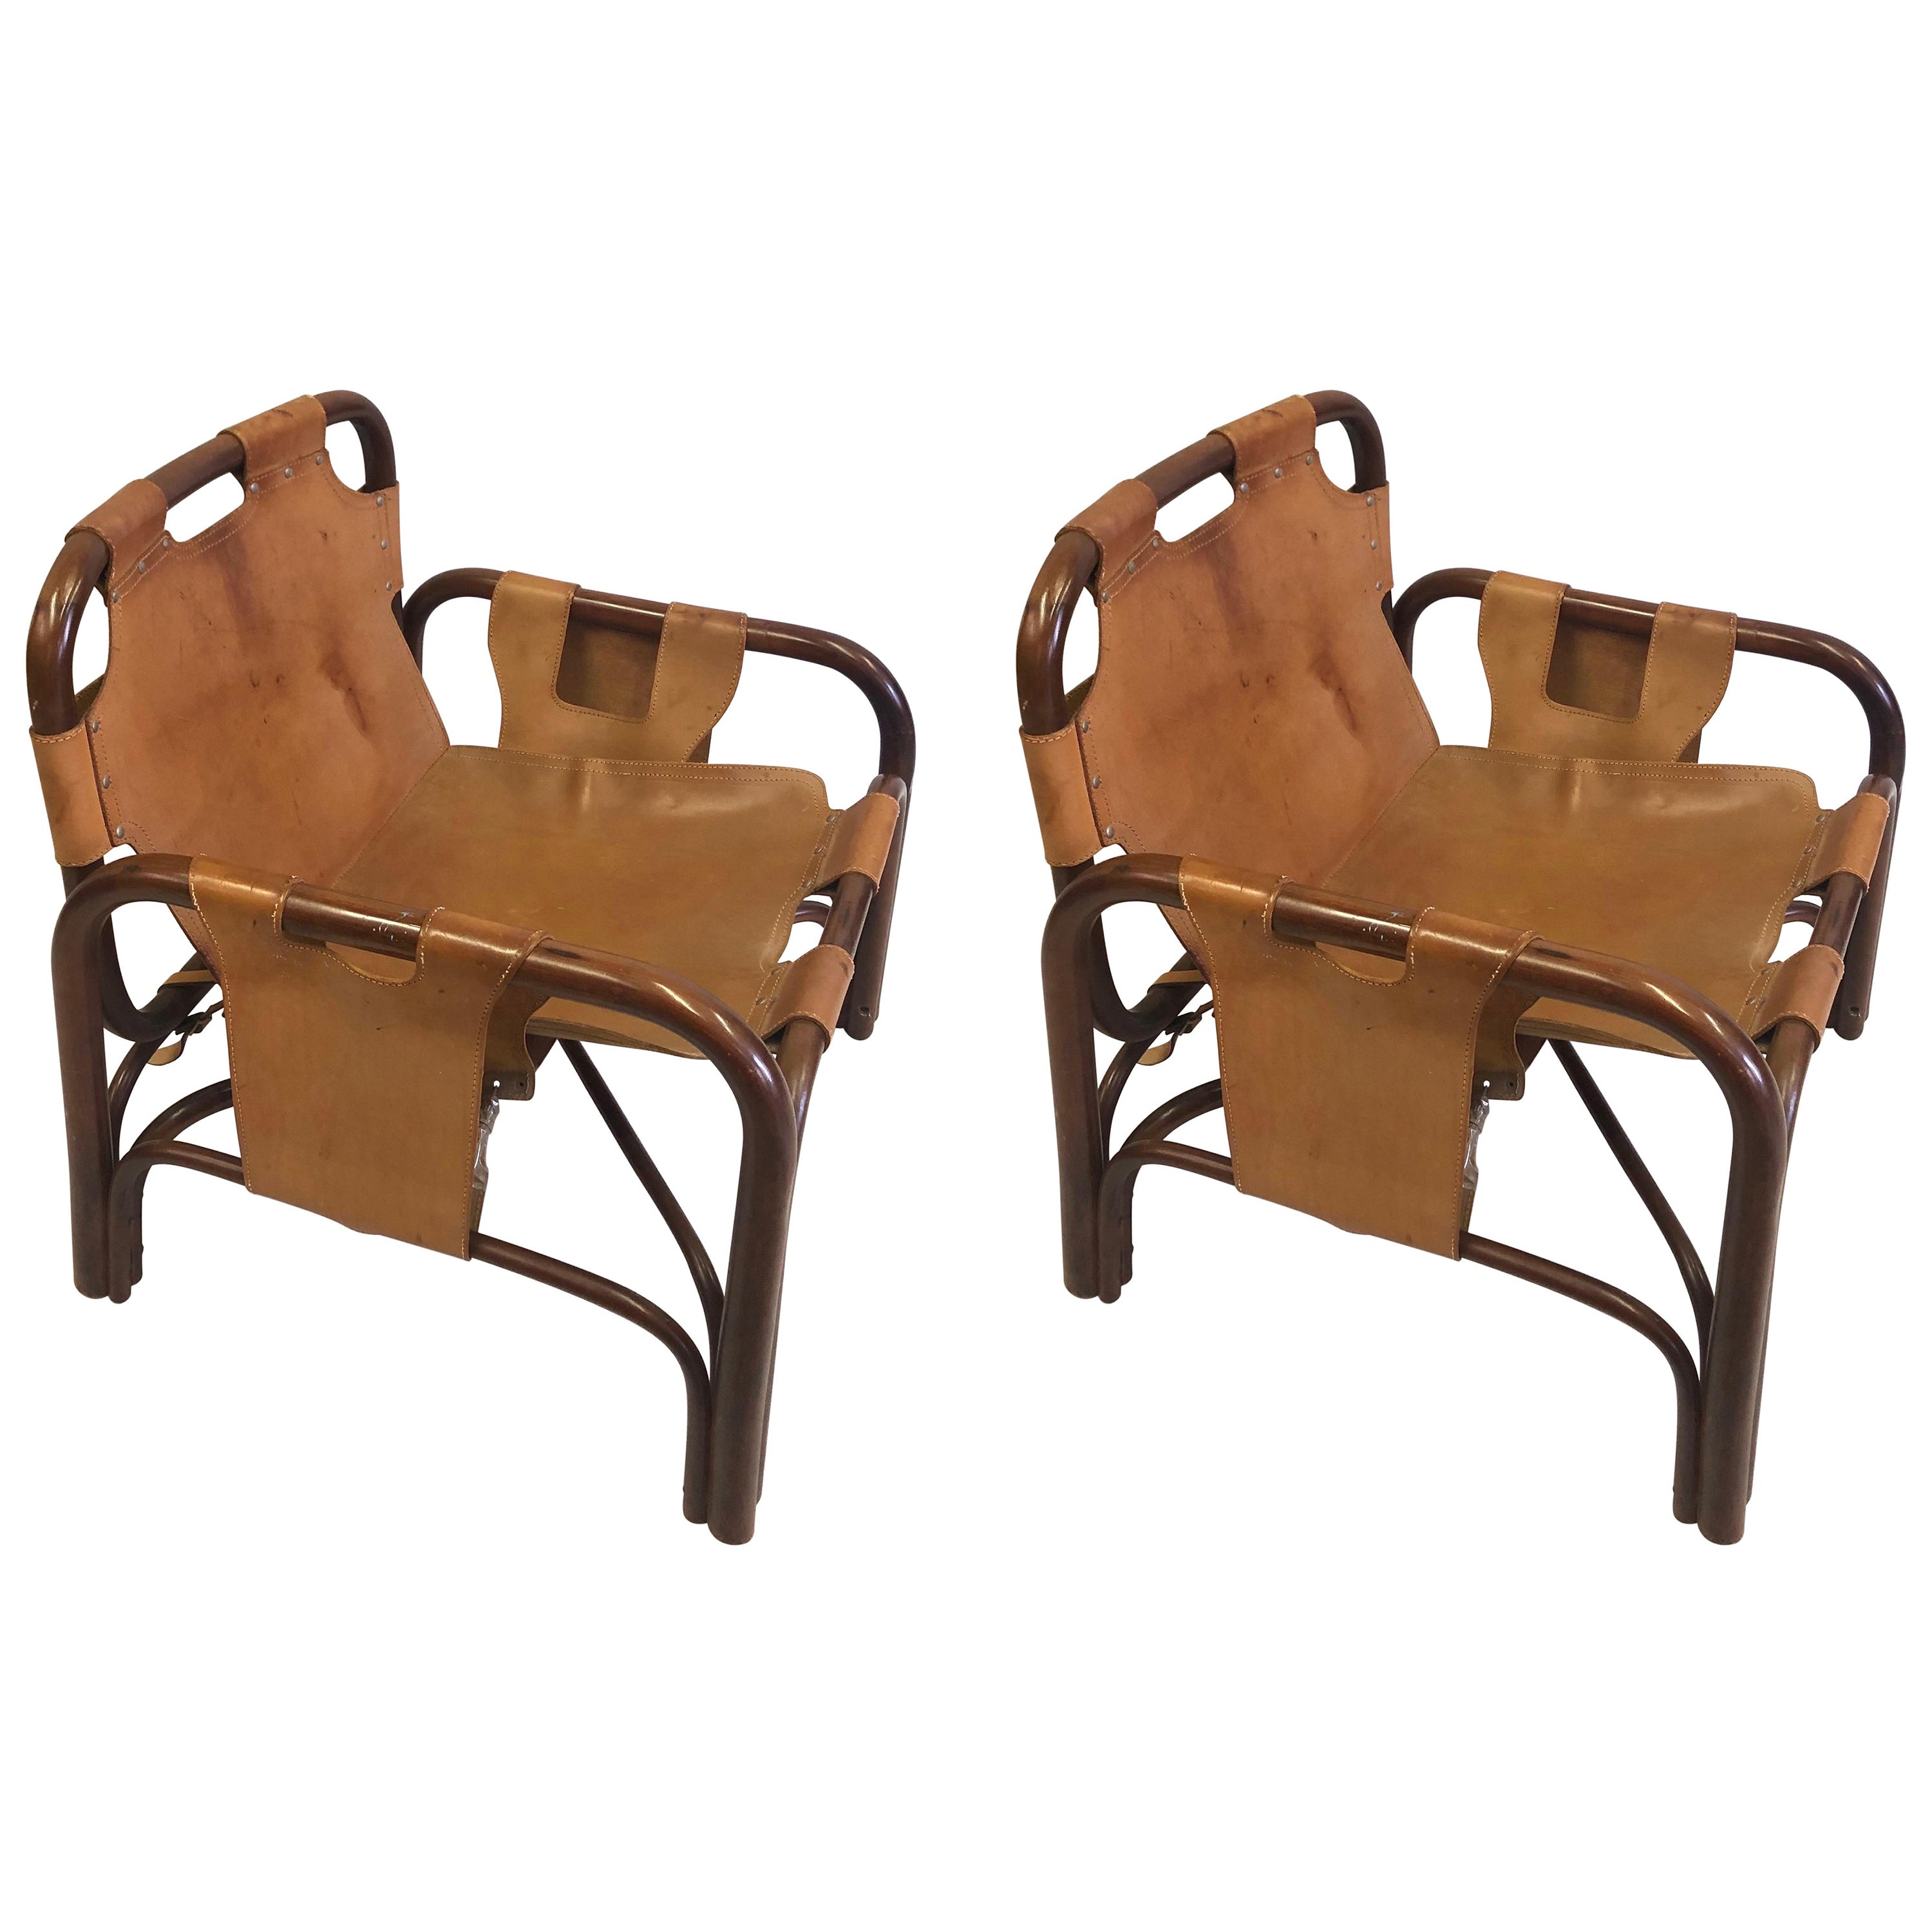 PAIR Italian Midcentury Bamboo & Stitched Leather Lounge Chairs, Jacques Adnet For Sale